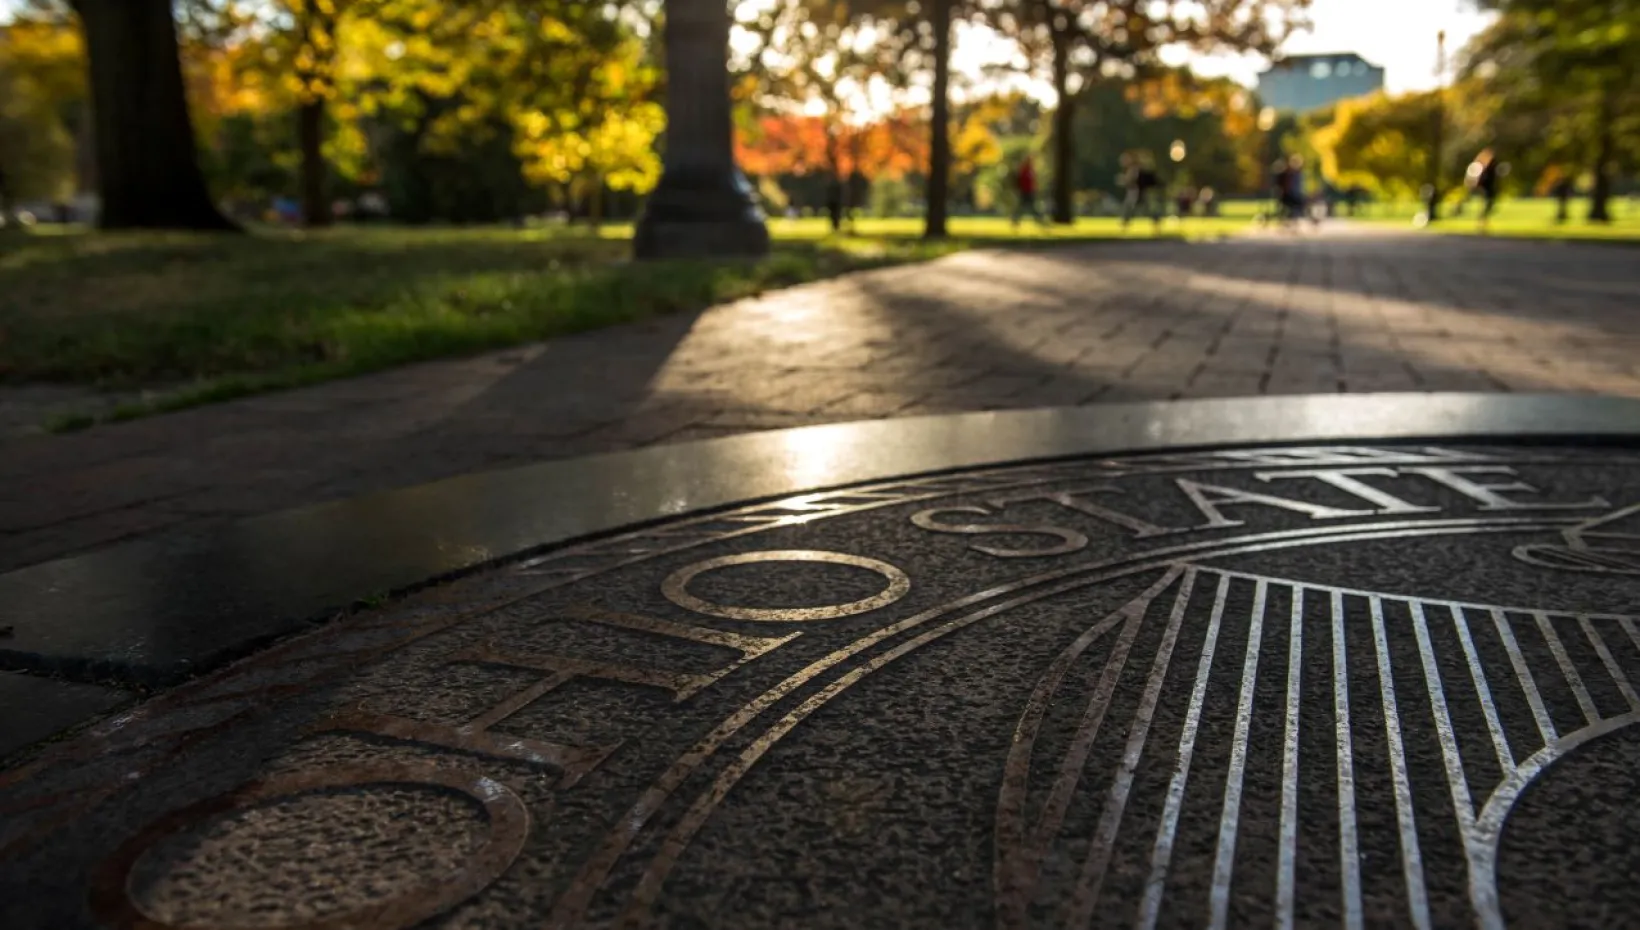 ohio state seal on the oval 